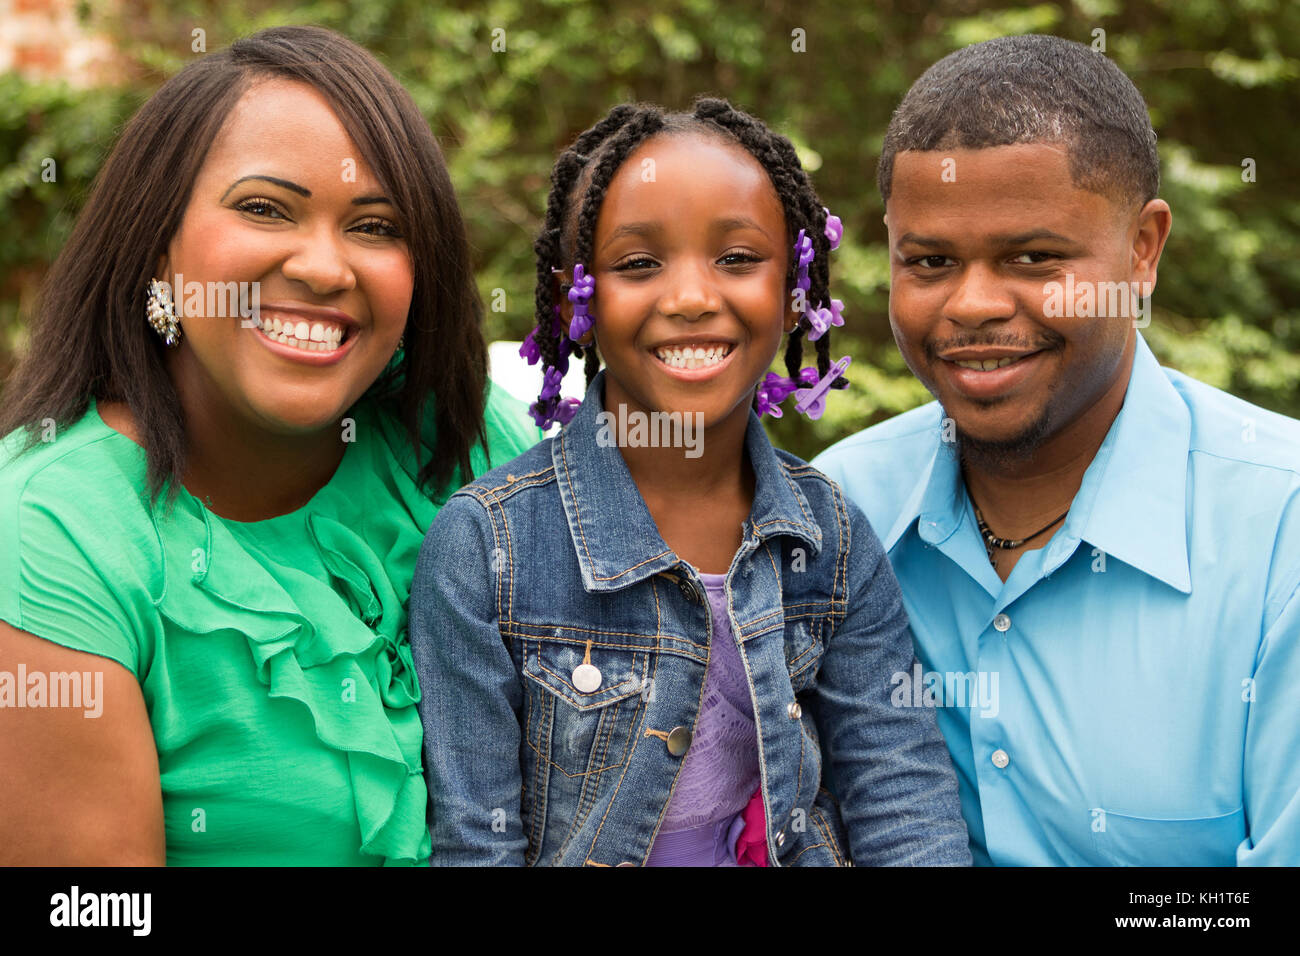 Portrait Of Happy African American Family. Stockfoto